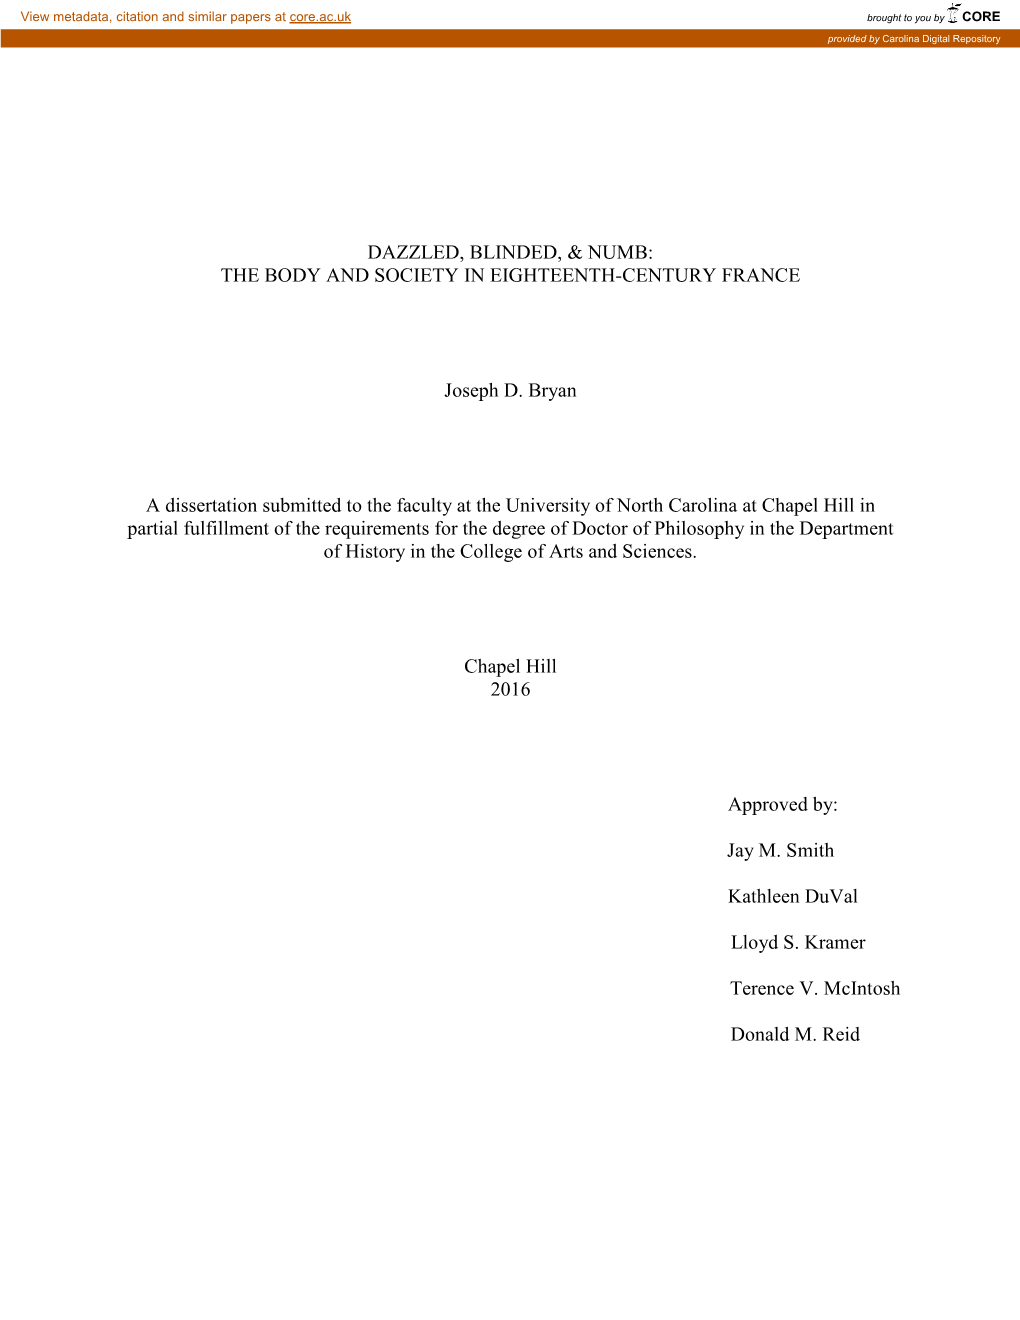 THE BODY and SOCIETY in EIGHTEENTH-CENTURY FRANCE Joseph D. Bryan a Dissertation Submitted To